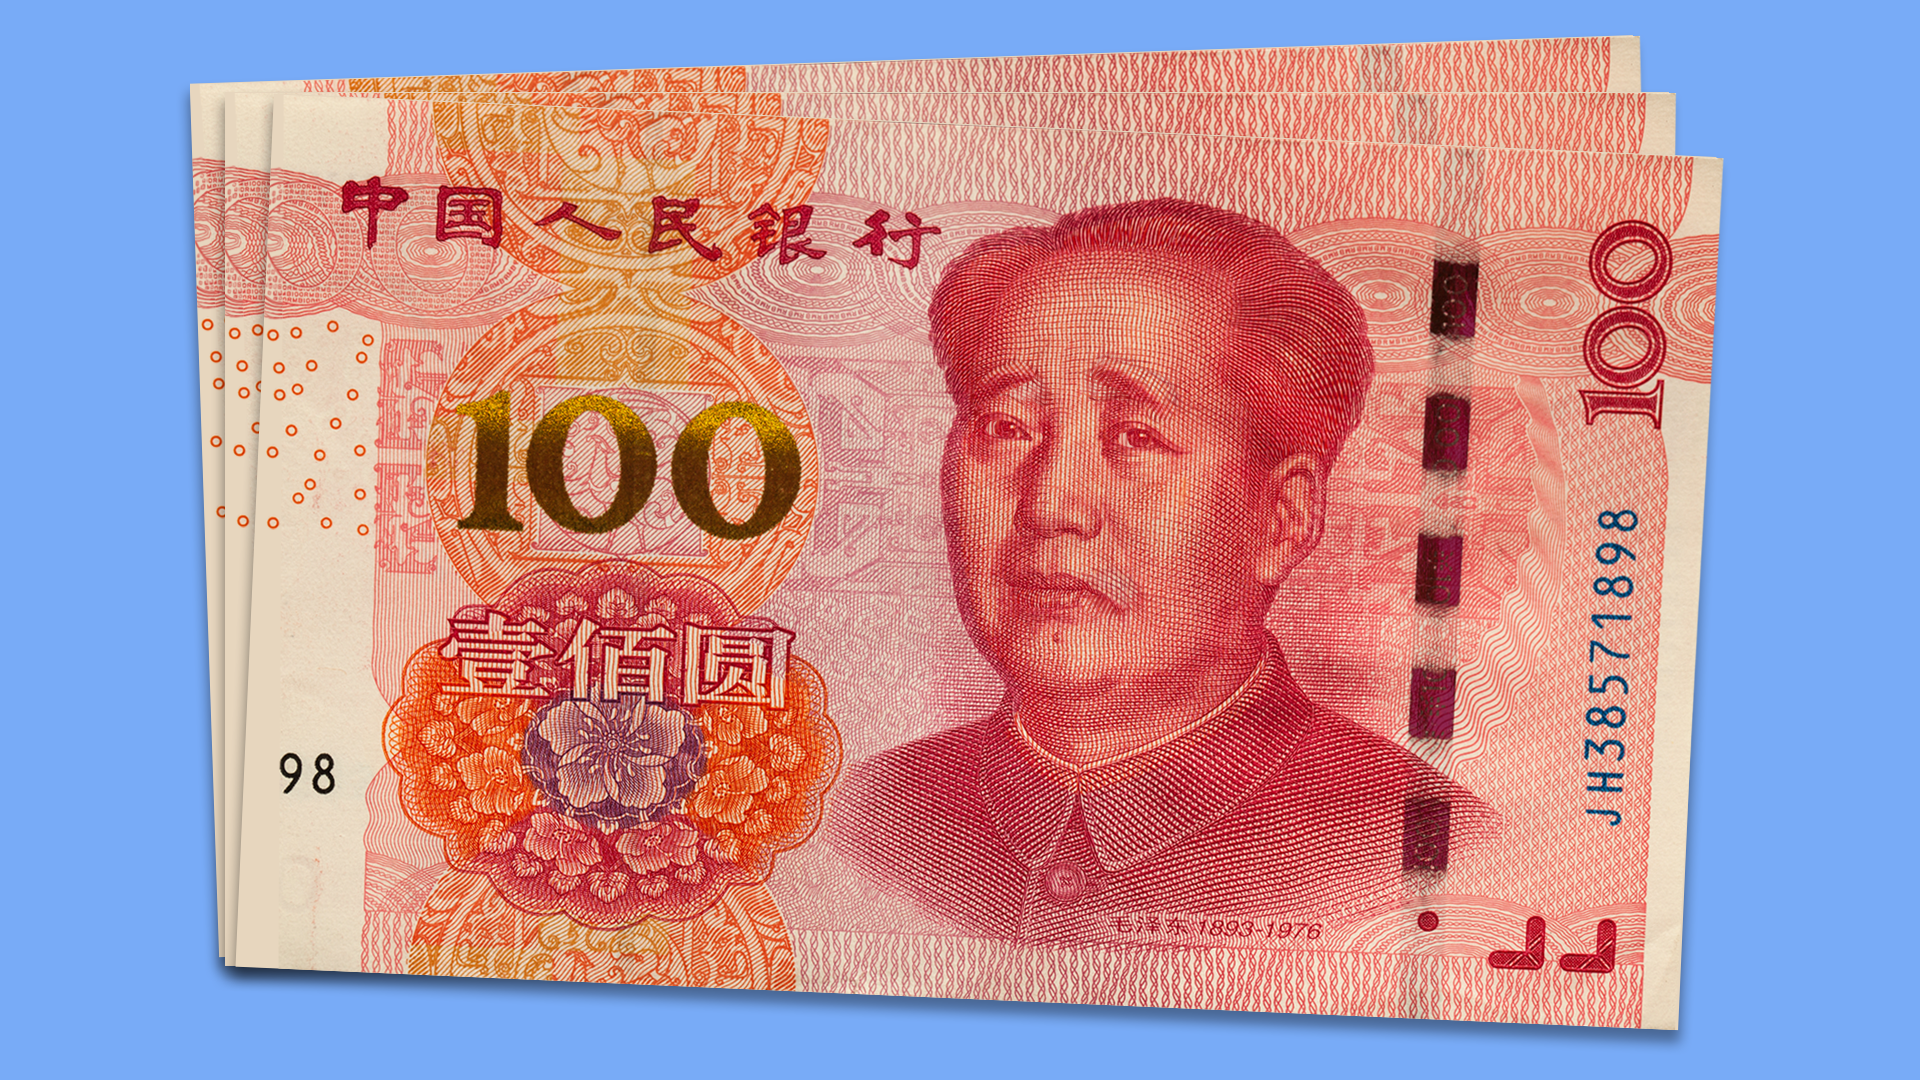 Illustration of Chinese yuan bill with a very unhappy Mao on it